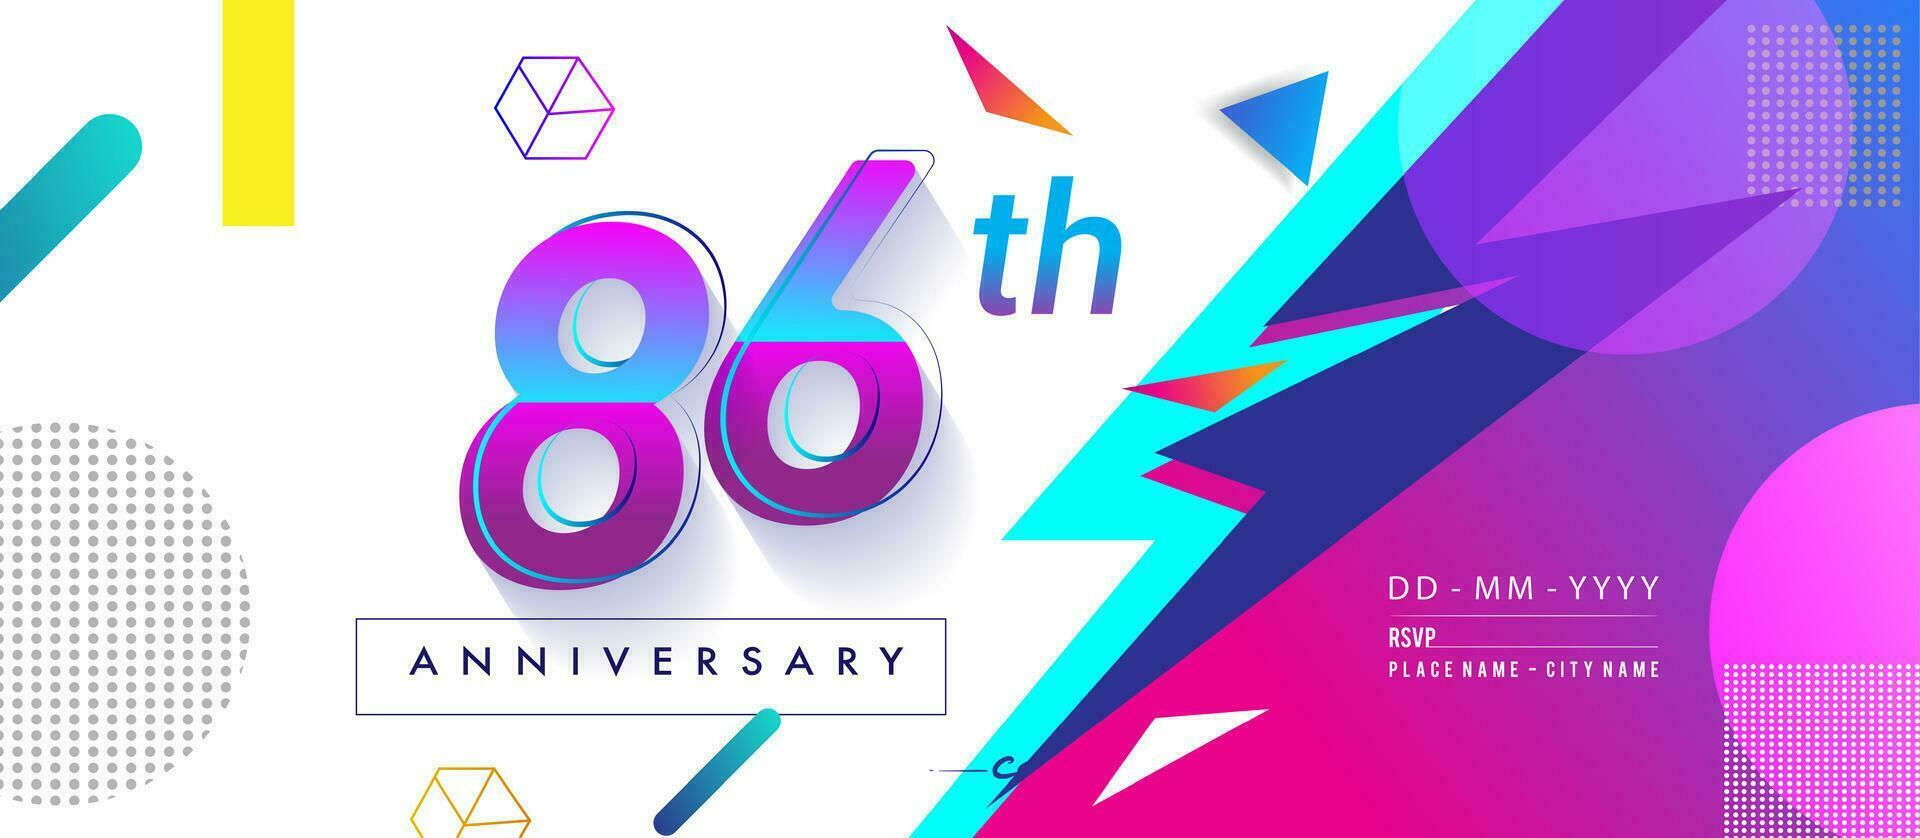 86th years anniversary logo, vector design birthday celebration with colorful geometric background and circles shape.